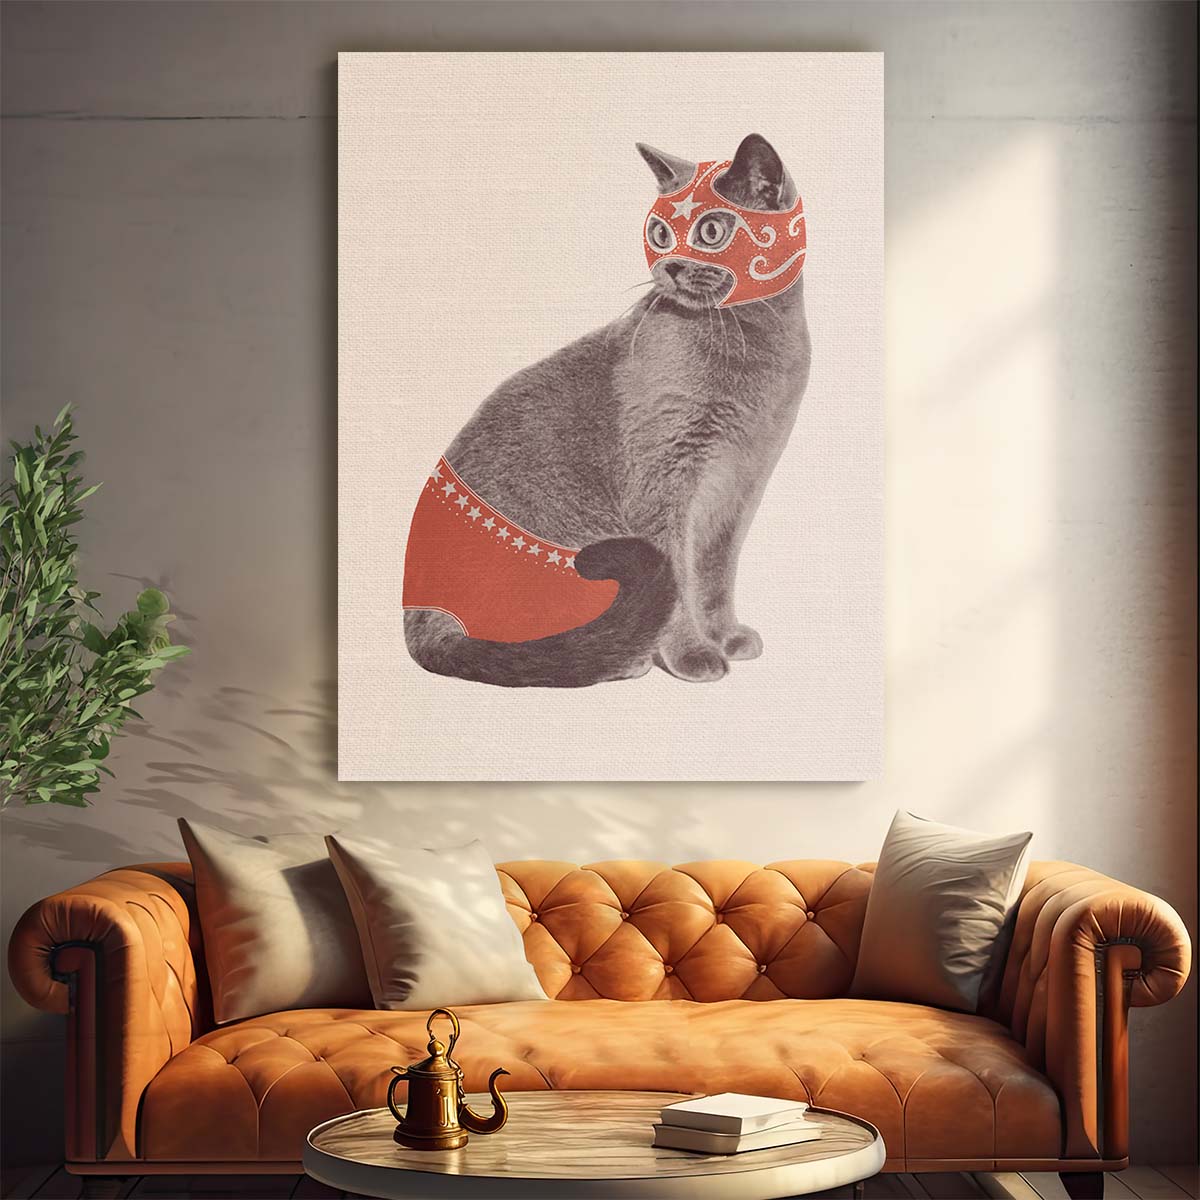 Funny Cat Illustration Wall Art - 'Chat Catcheur' by Florent Bodart by Luxuriance Designs, made in USA